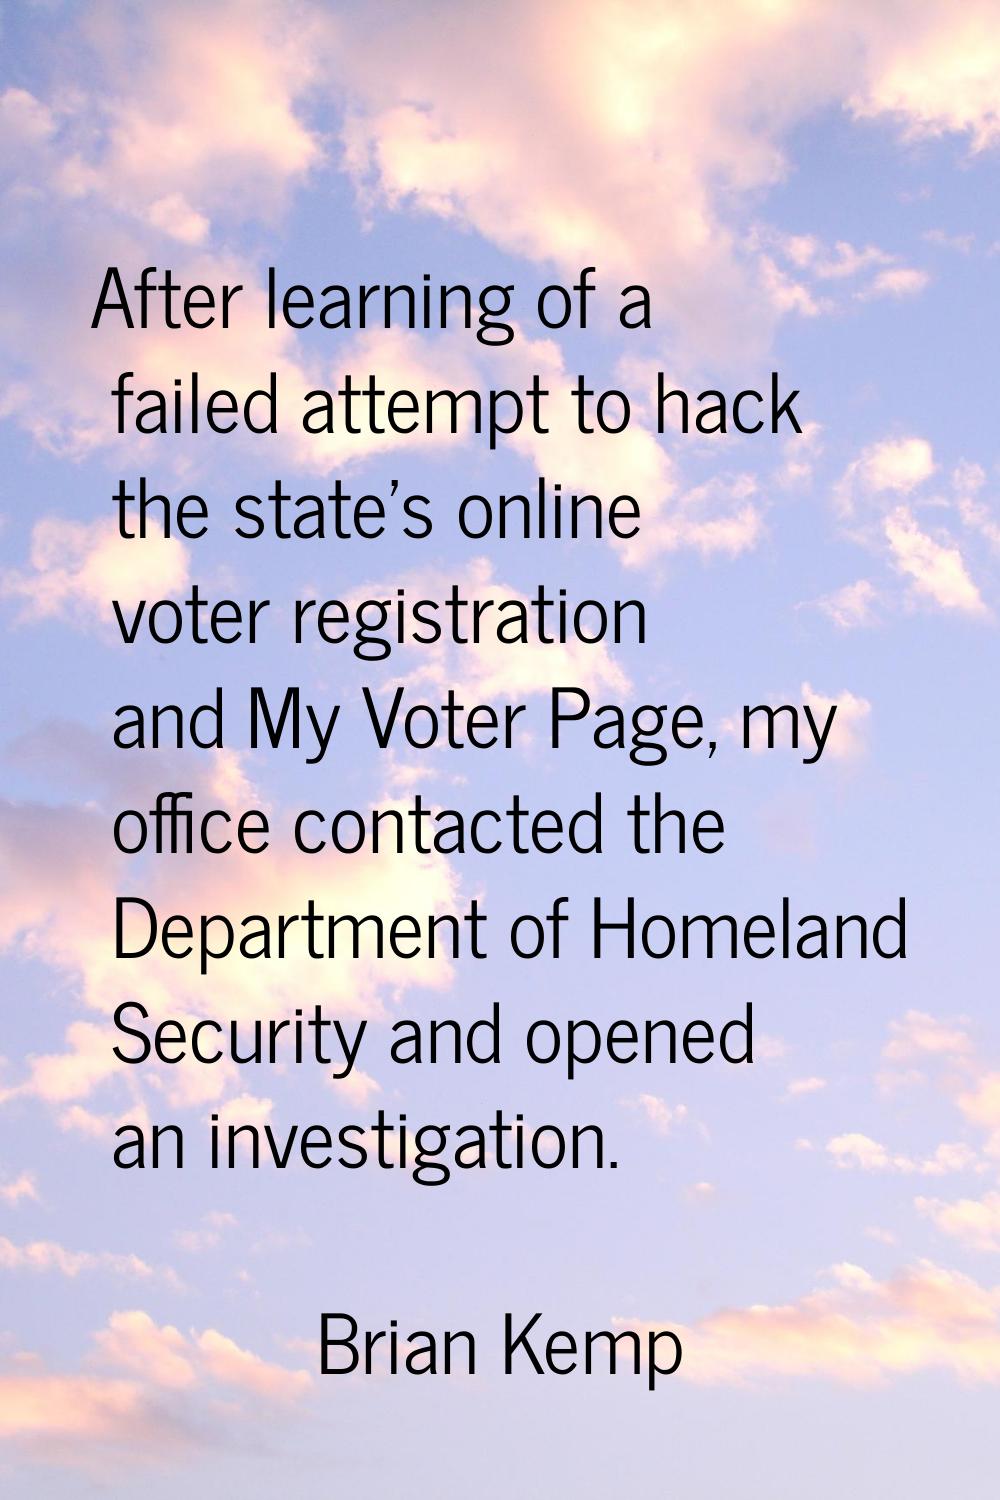 After learning of a failed attempt to hack the state's online voter registration and My Voter Page,